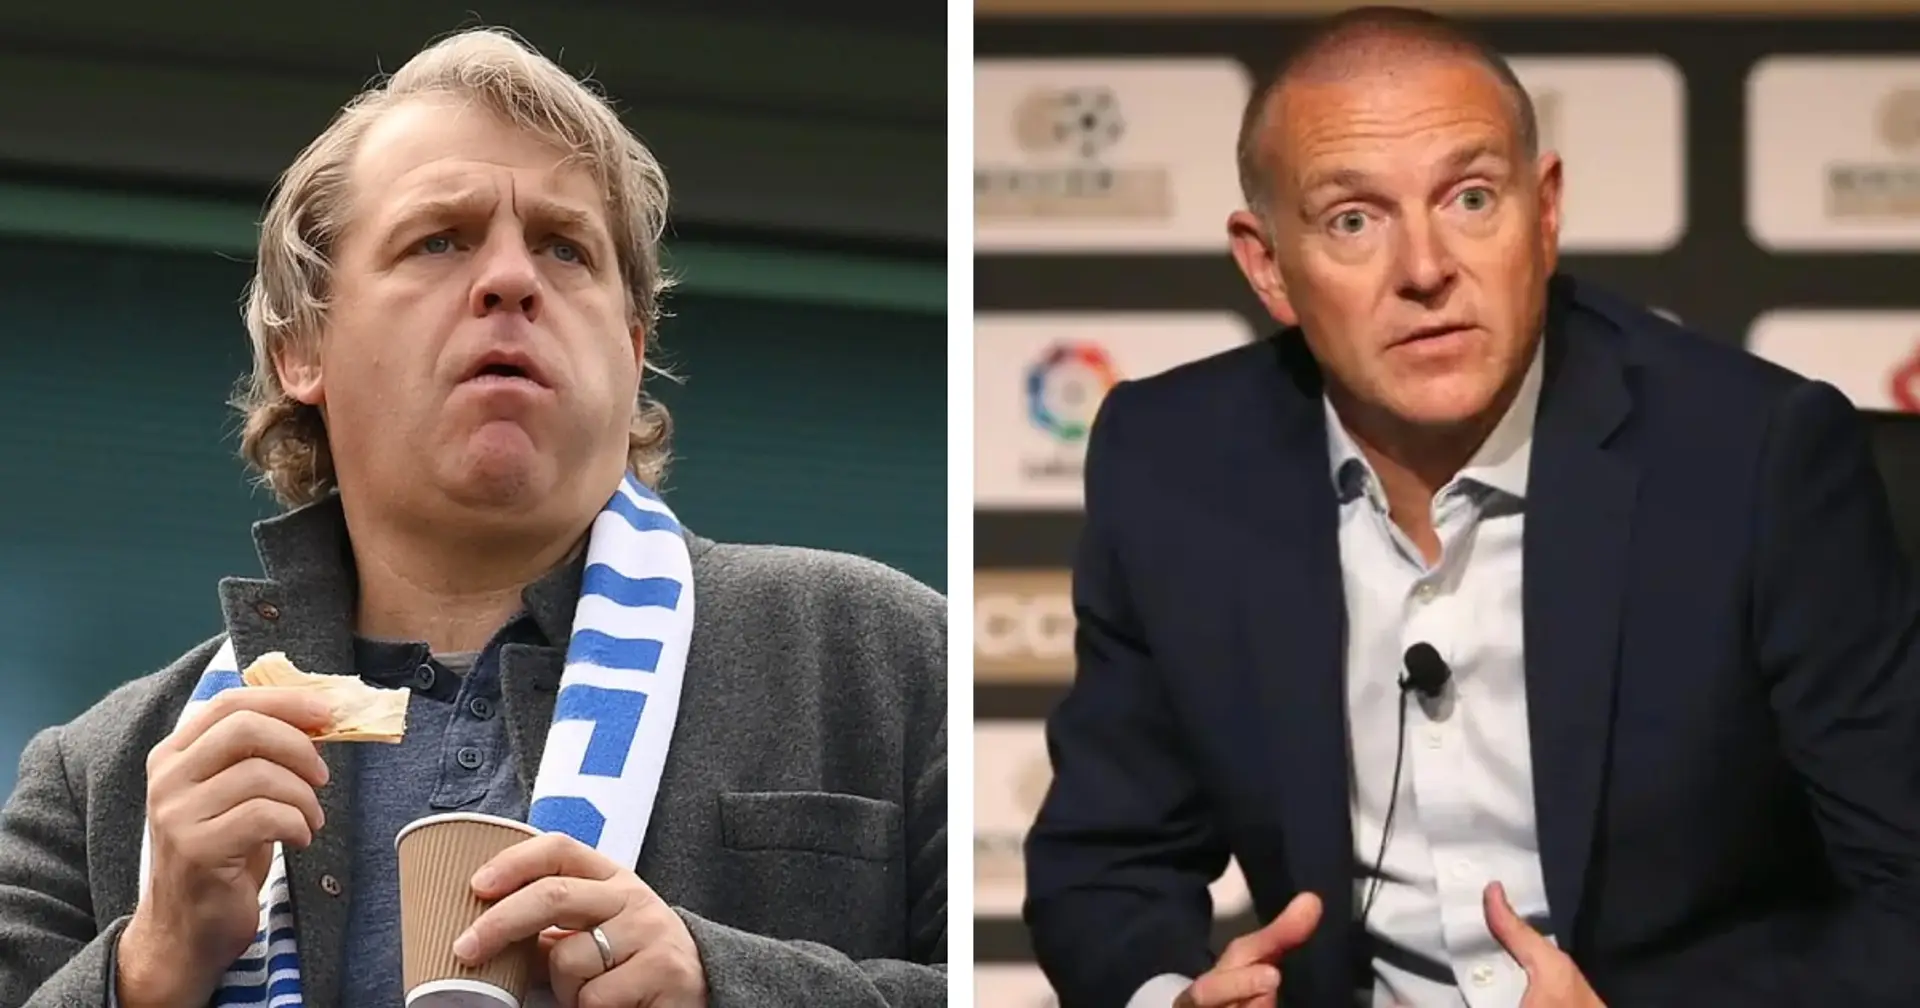 'It's flattering but annoying': Brighton CEO says relations with Chelsea bosses cordial despite recent personnel raids